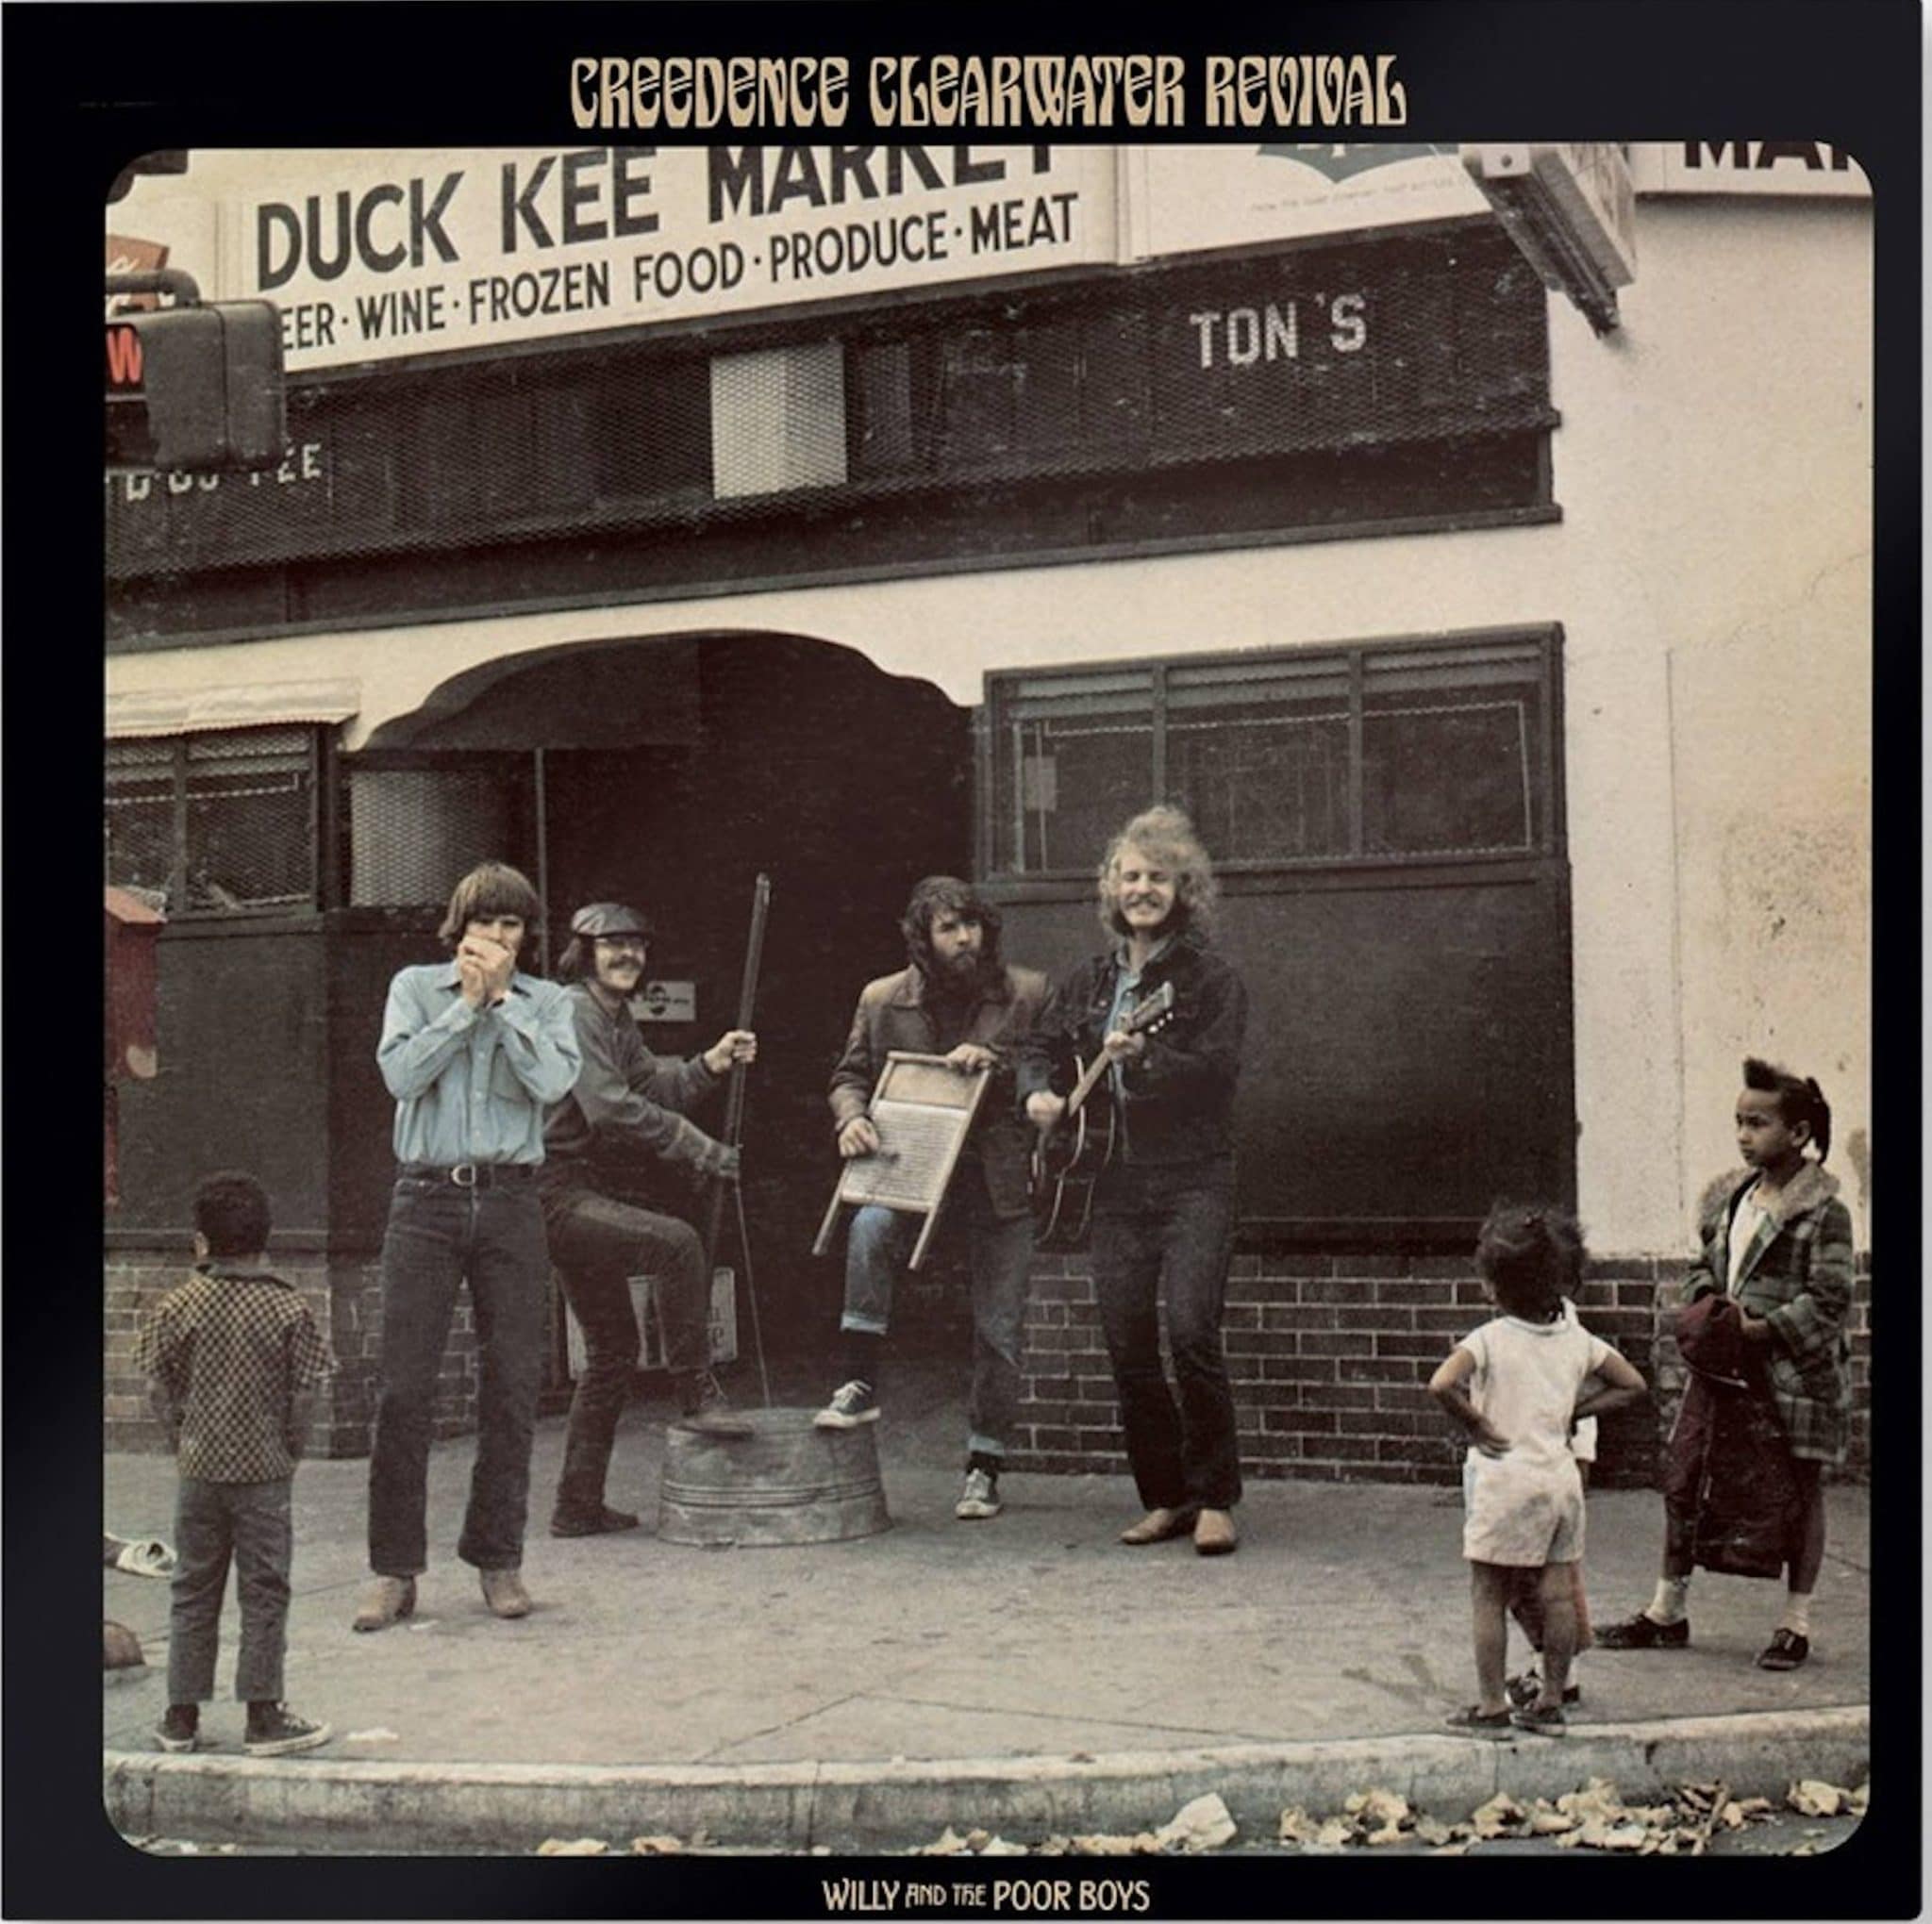 Creedence Clearwater Revival: Three & Four Released